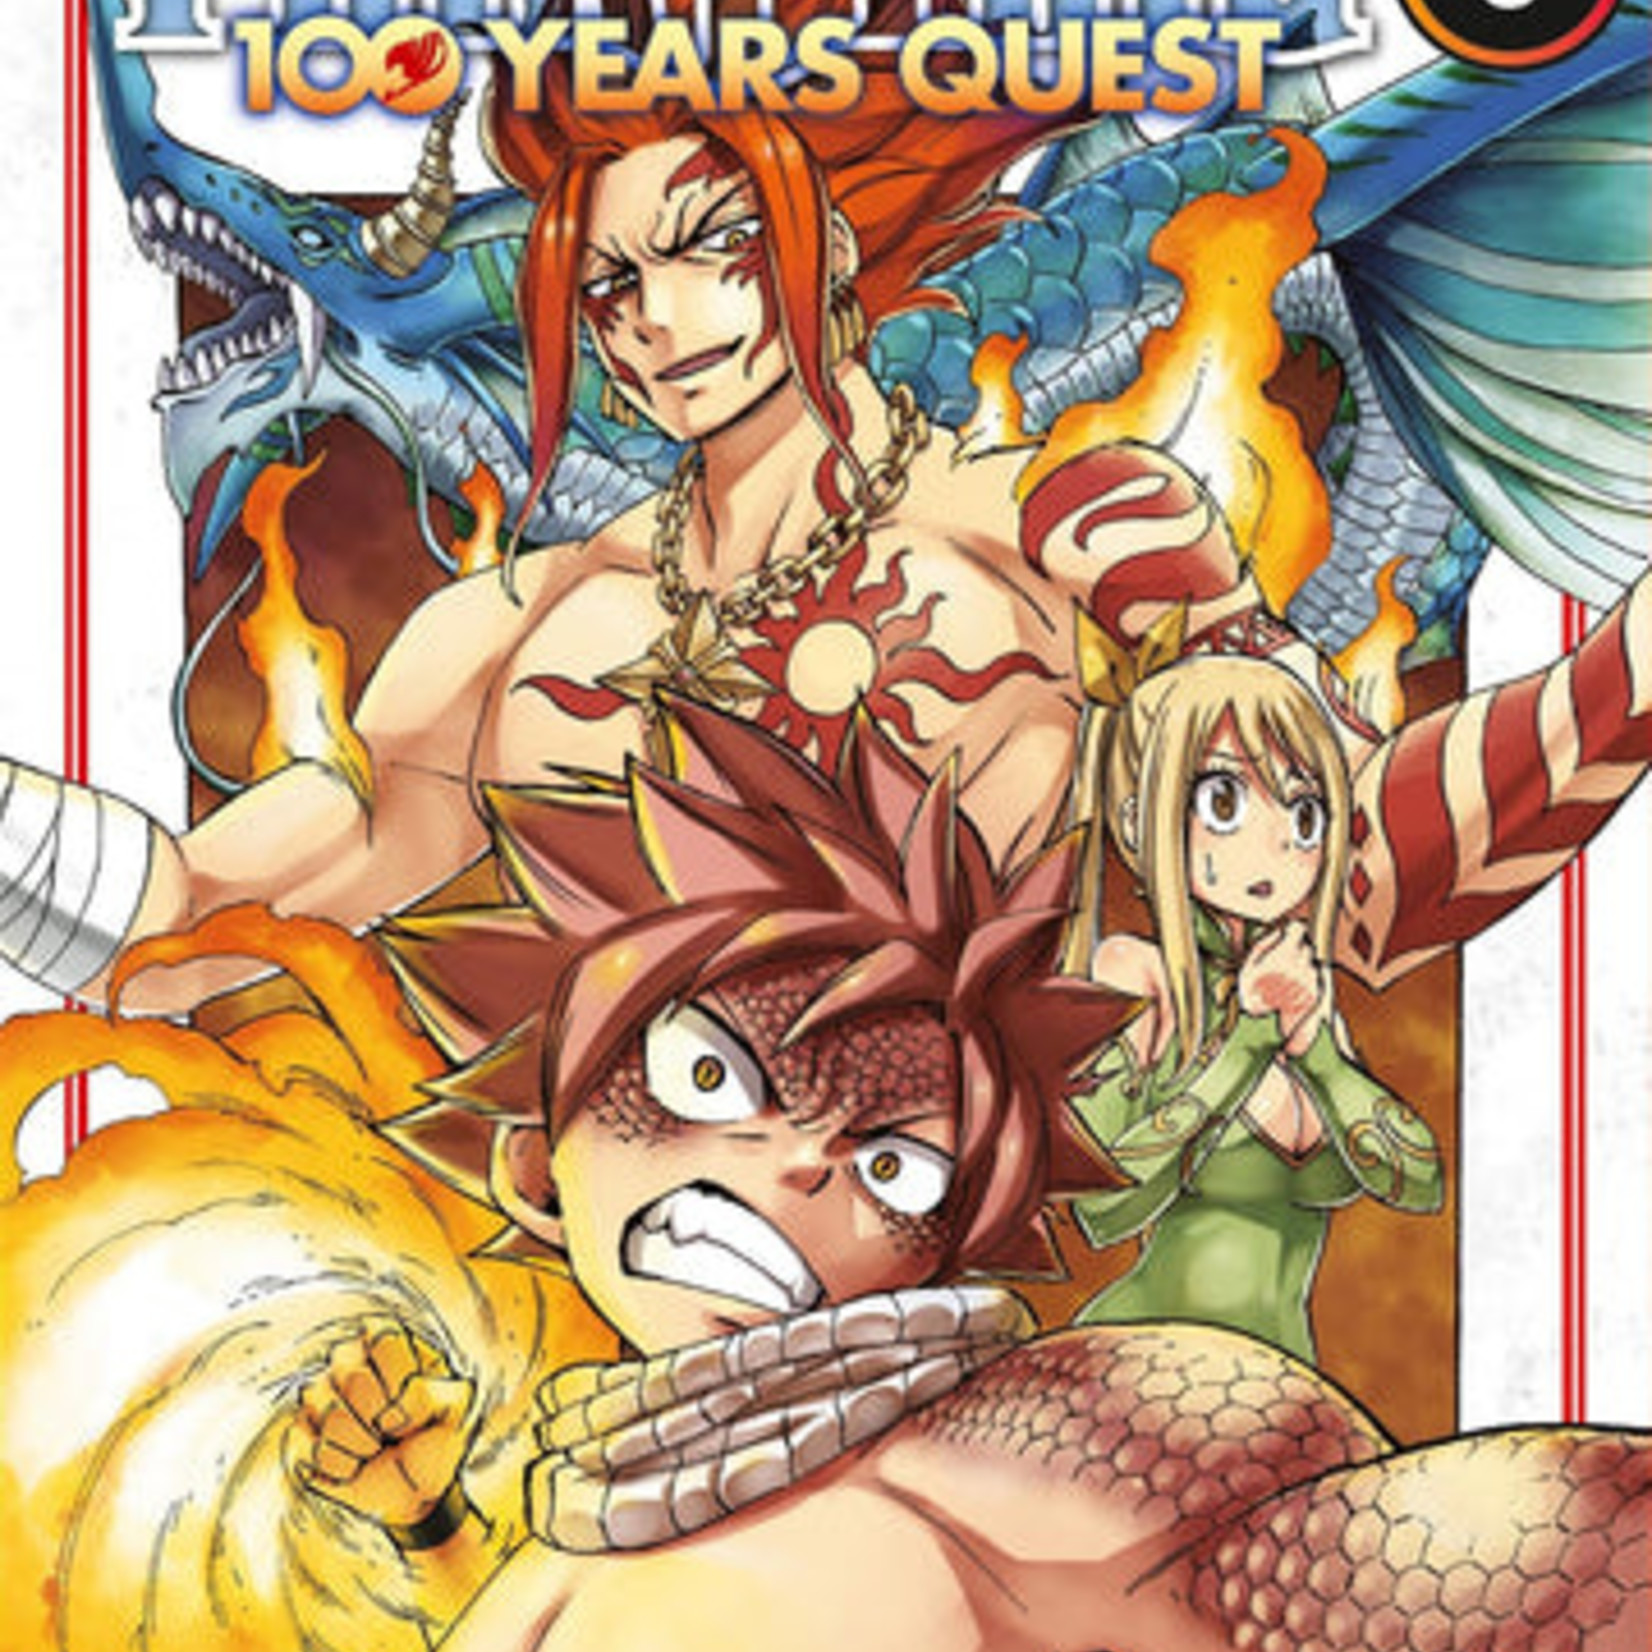 Pika Edition Manga - Fairy Tail 100 Years Quest Tome 03